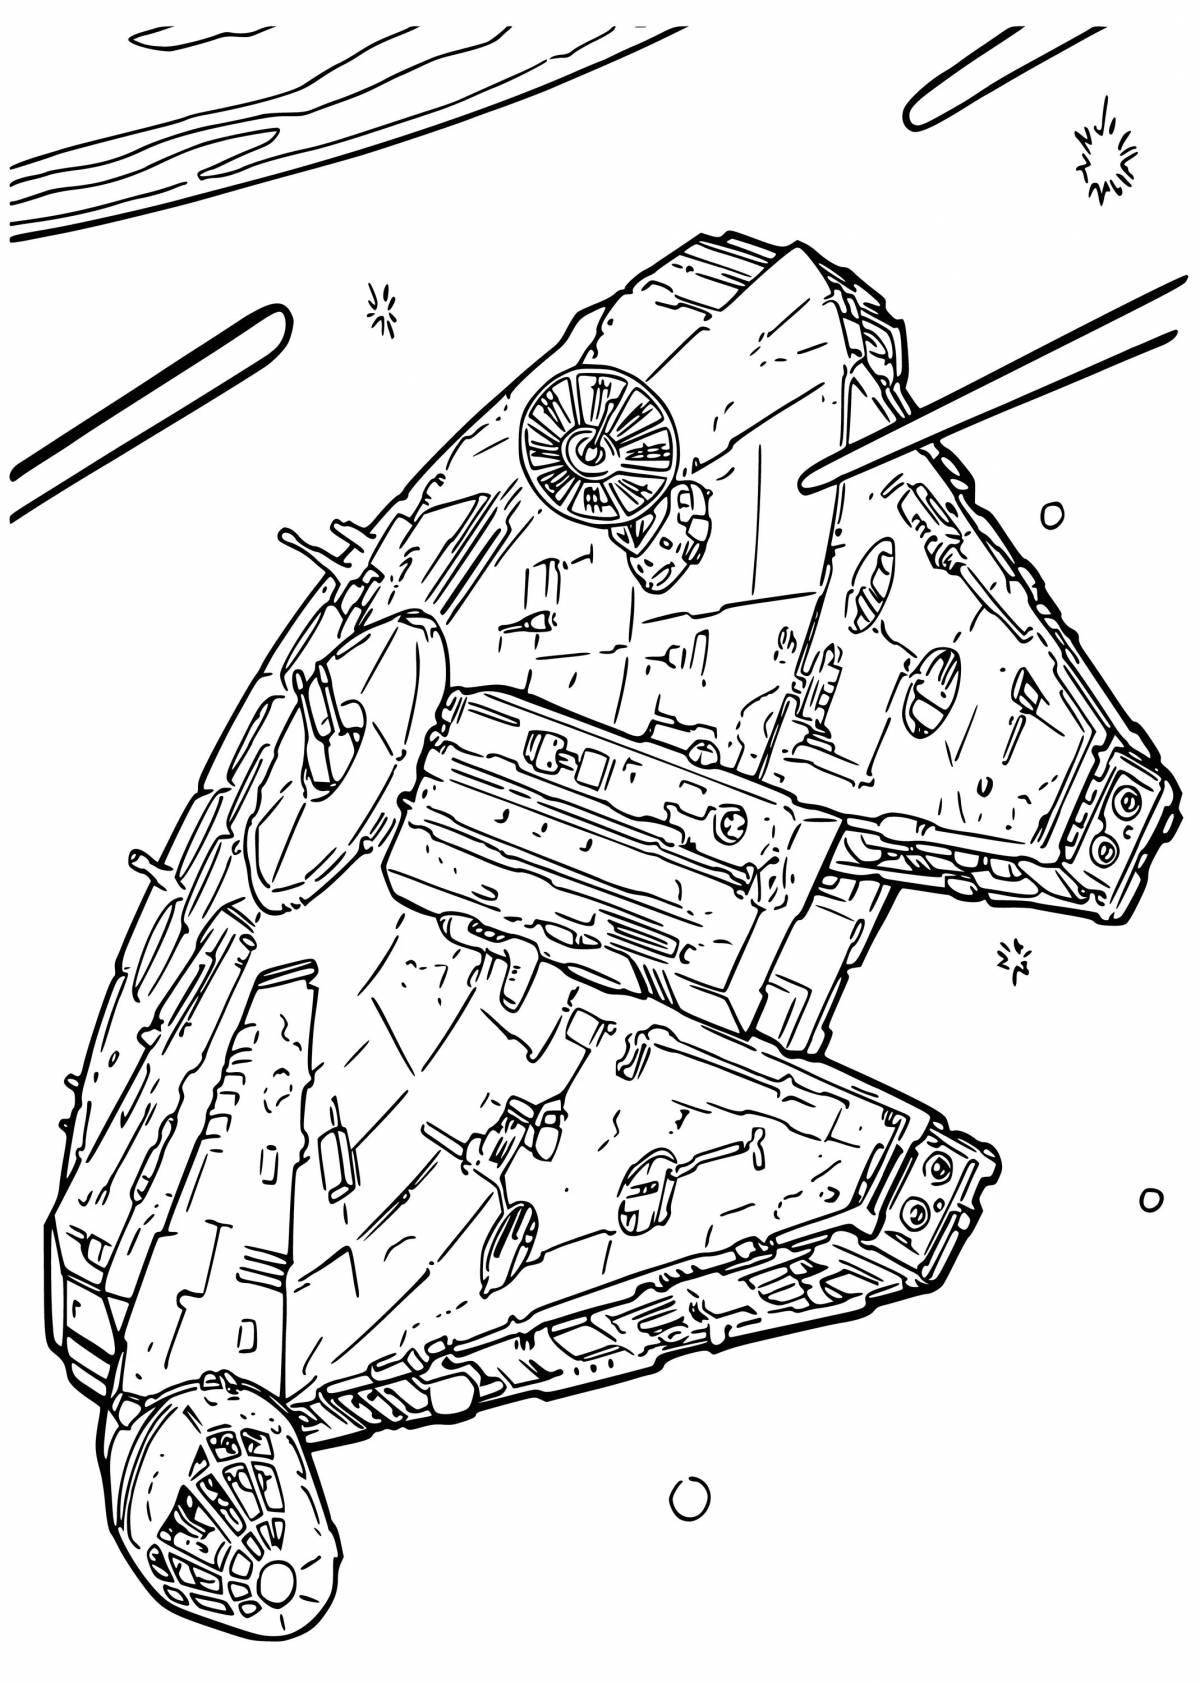 Exciting space wars coloring book